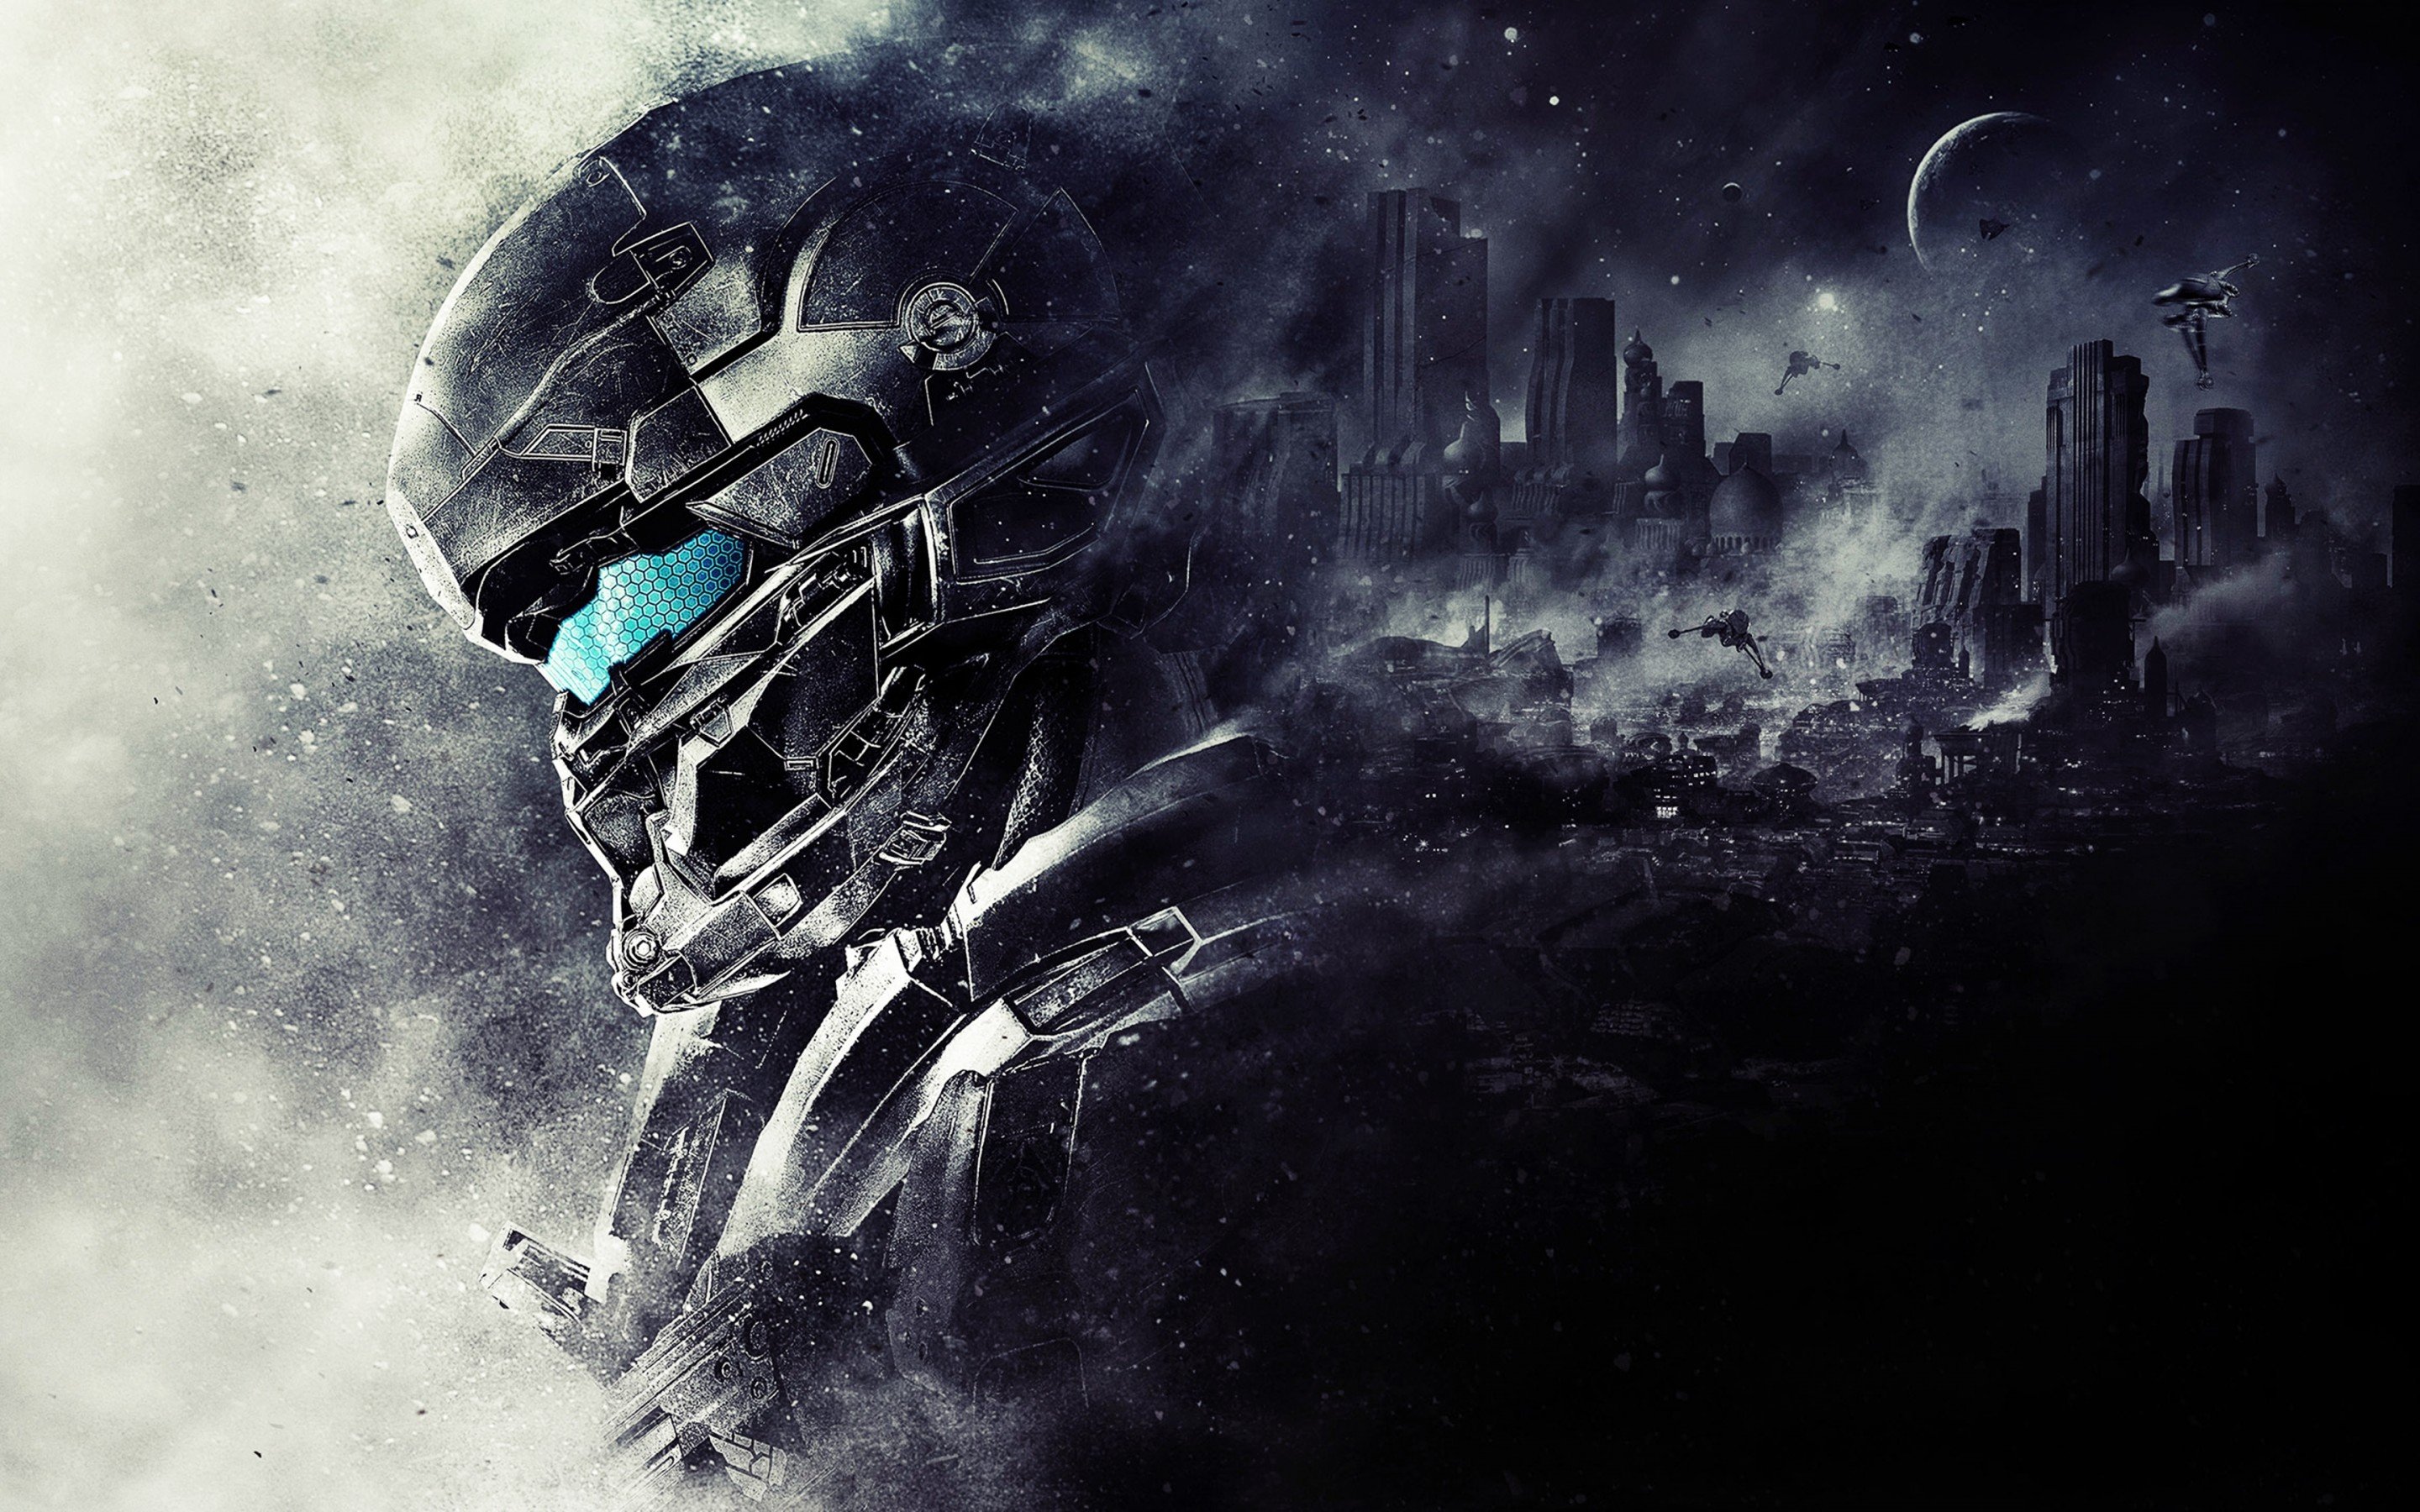 Halo 5 Guardians Wallpapers 2880x1800